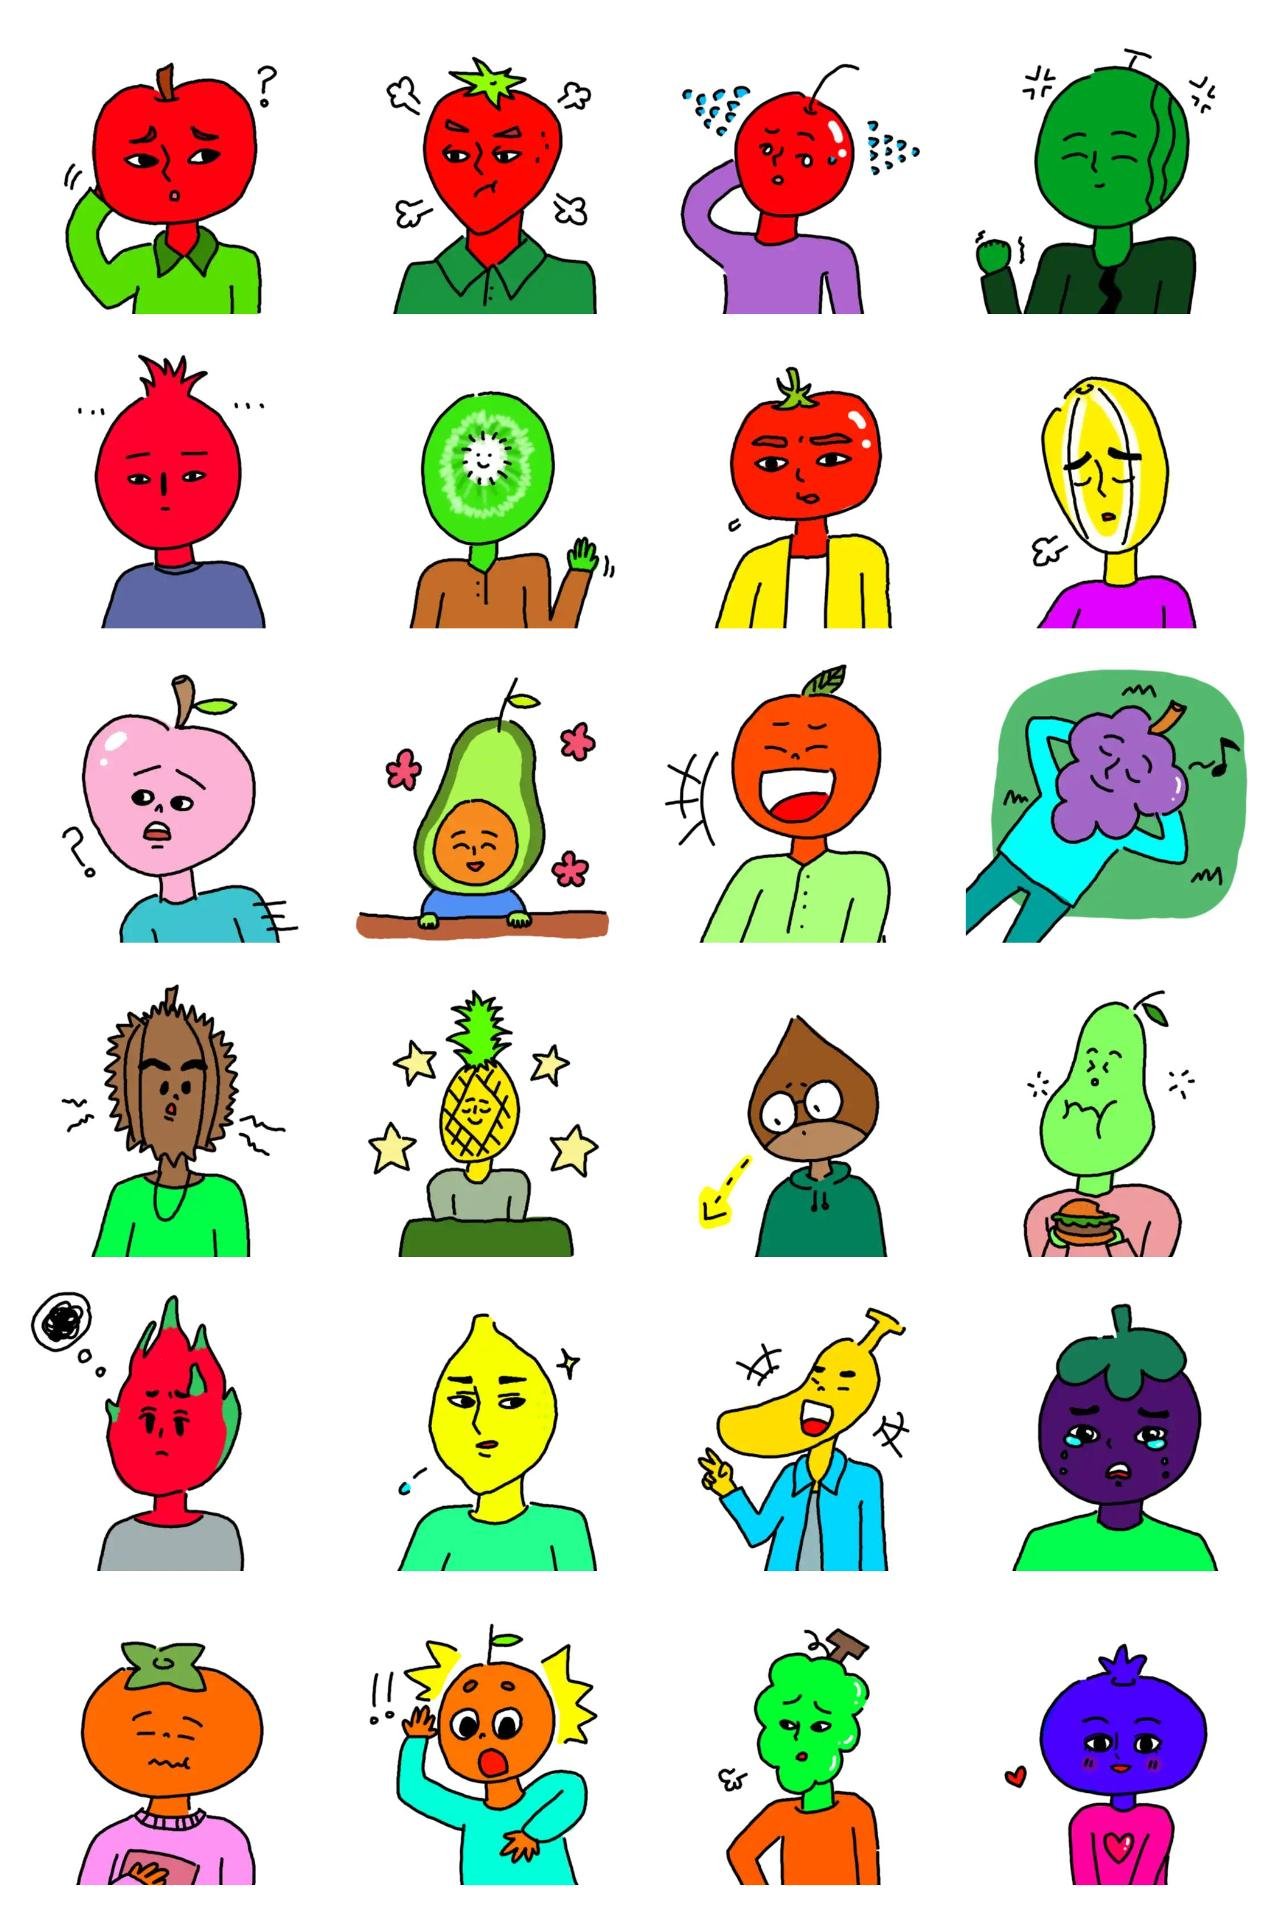 Fruit friends Food/Drink,Etc. sticker pack for Whatsapp, Telegram, Signal, and others chatting and message apps